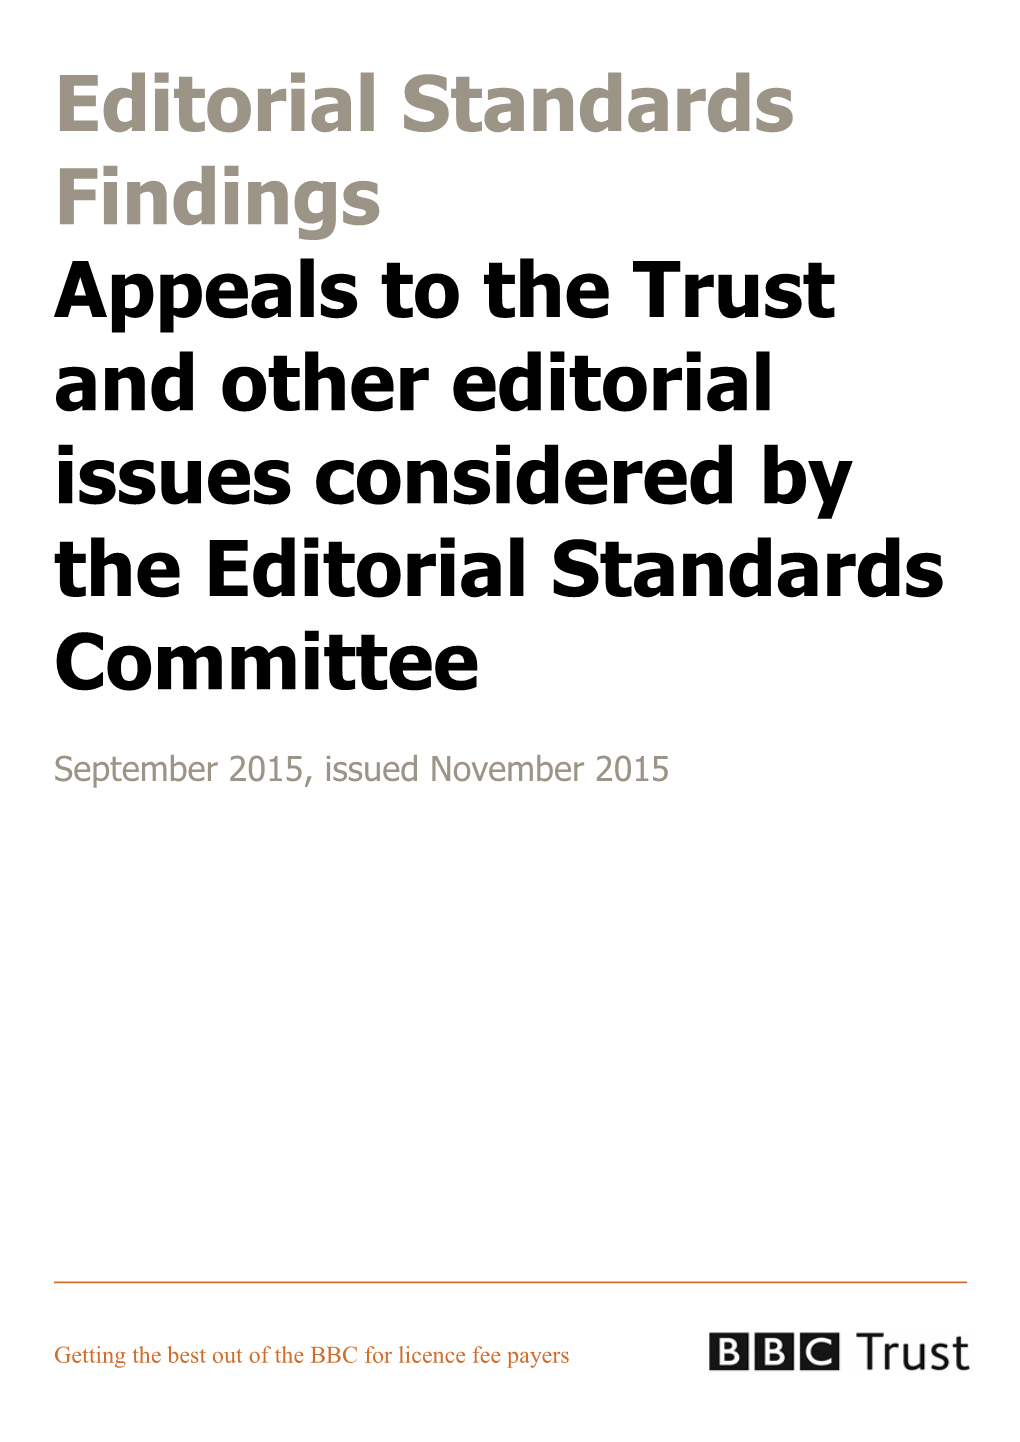 Appeals to the Trust and Other Editorial Issues Considered by the Editorial Standards Committee